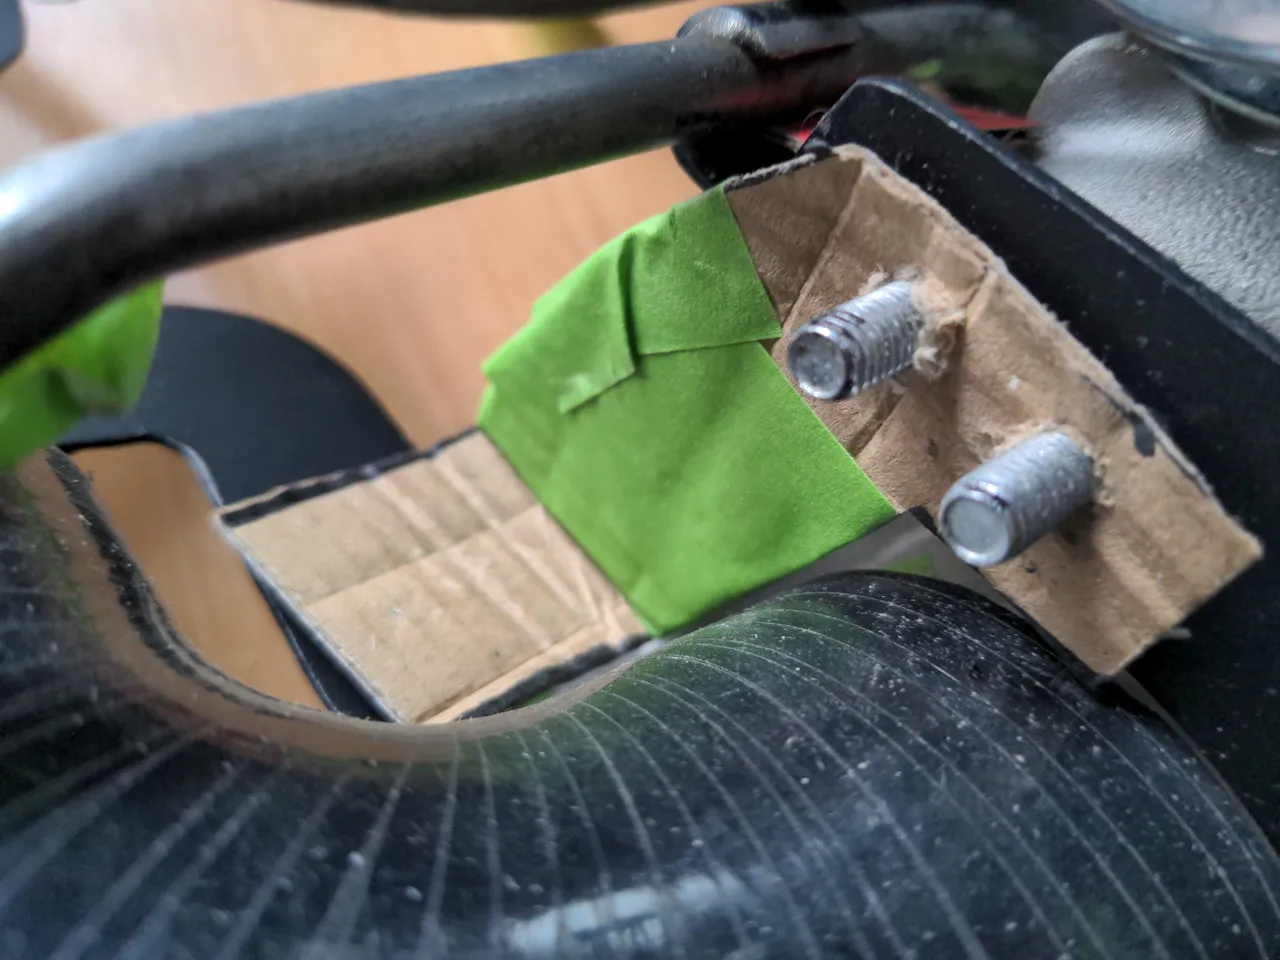 A crude prototype of a bracket, cut out of cardboard. Some green masking tape reinforces the cardboard. On one end, the two M6 bolts from earlier poke through the cardboard.